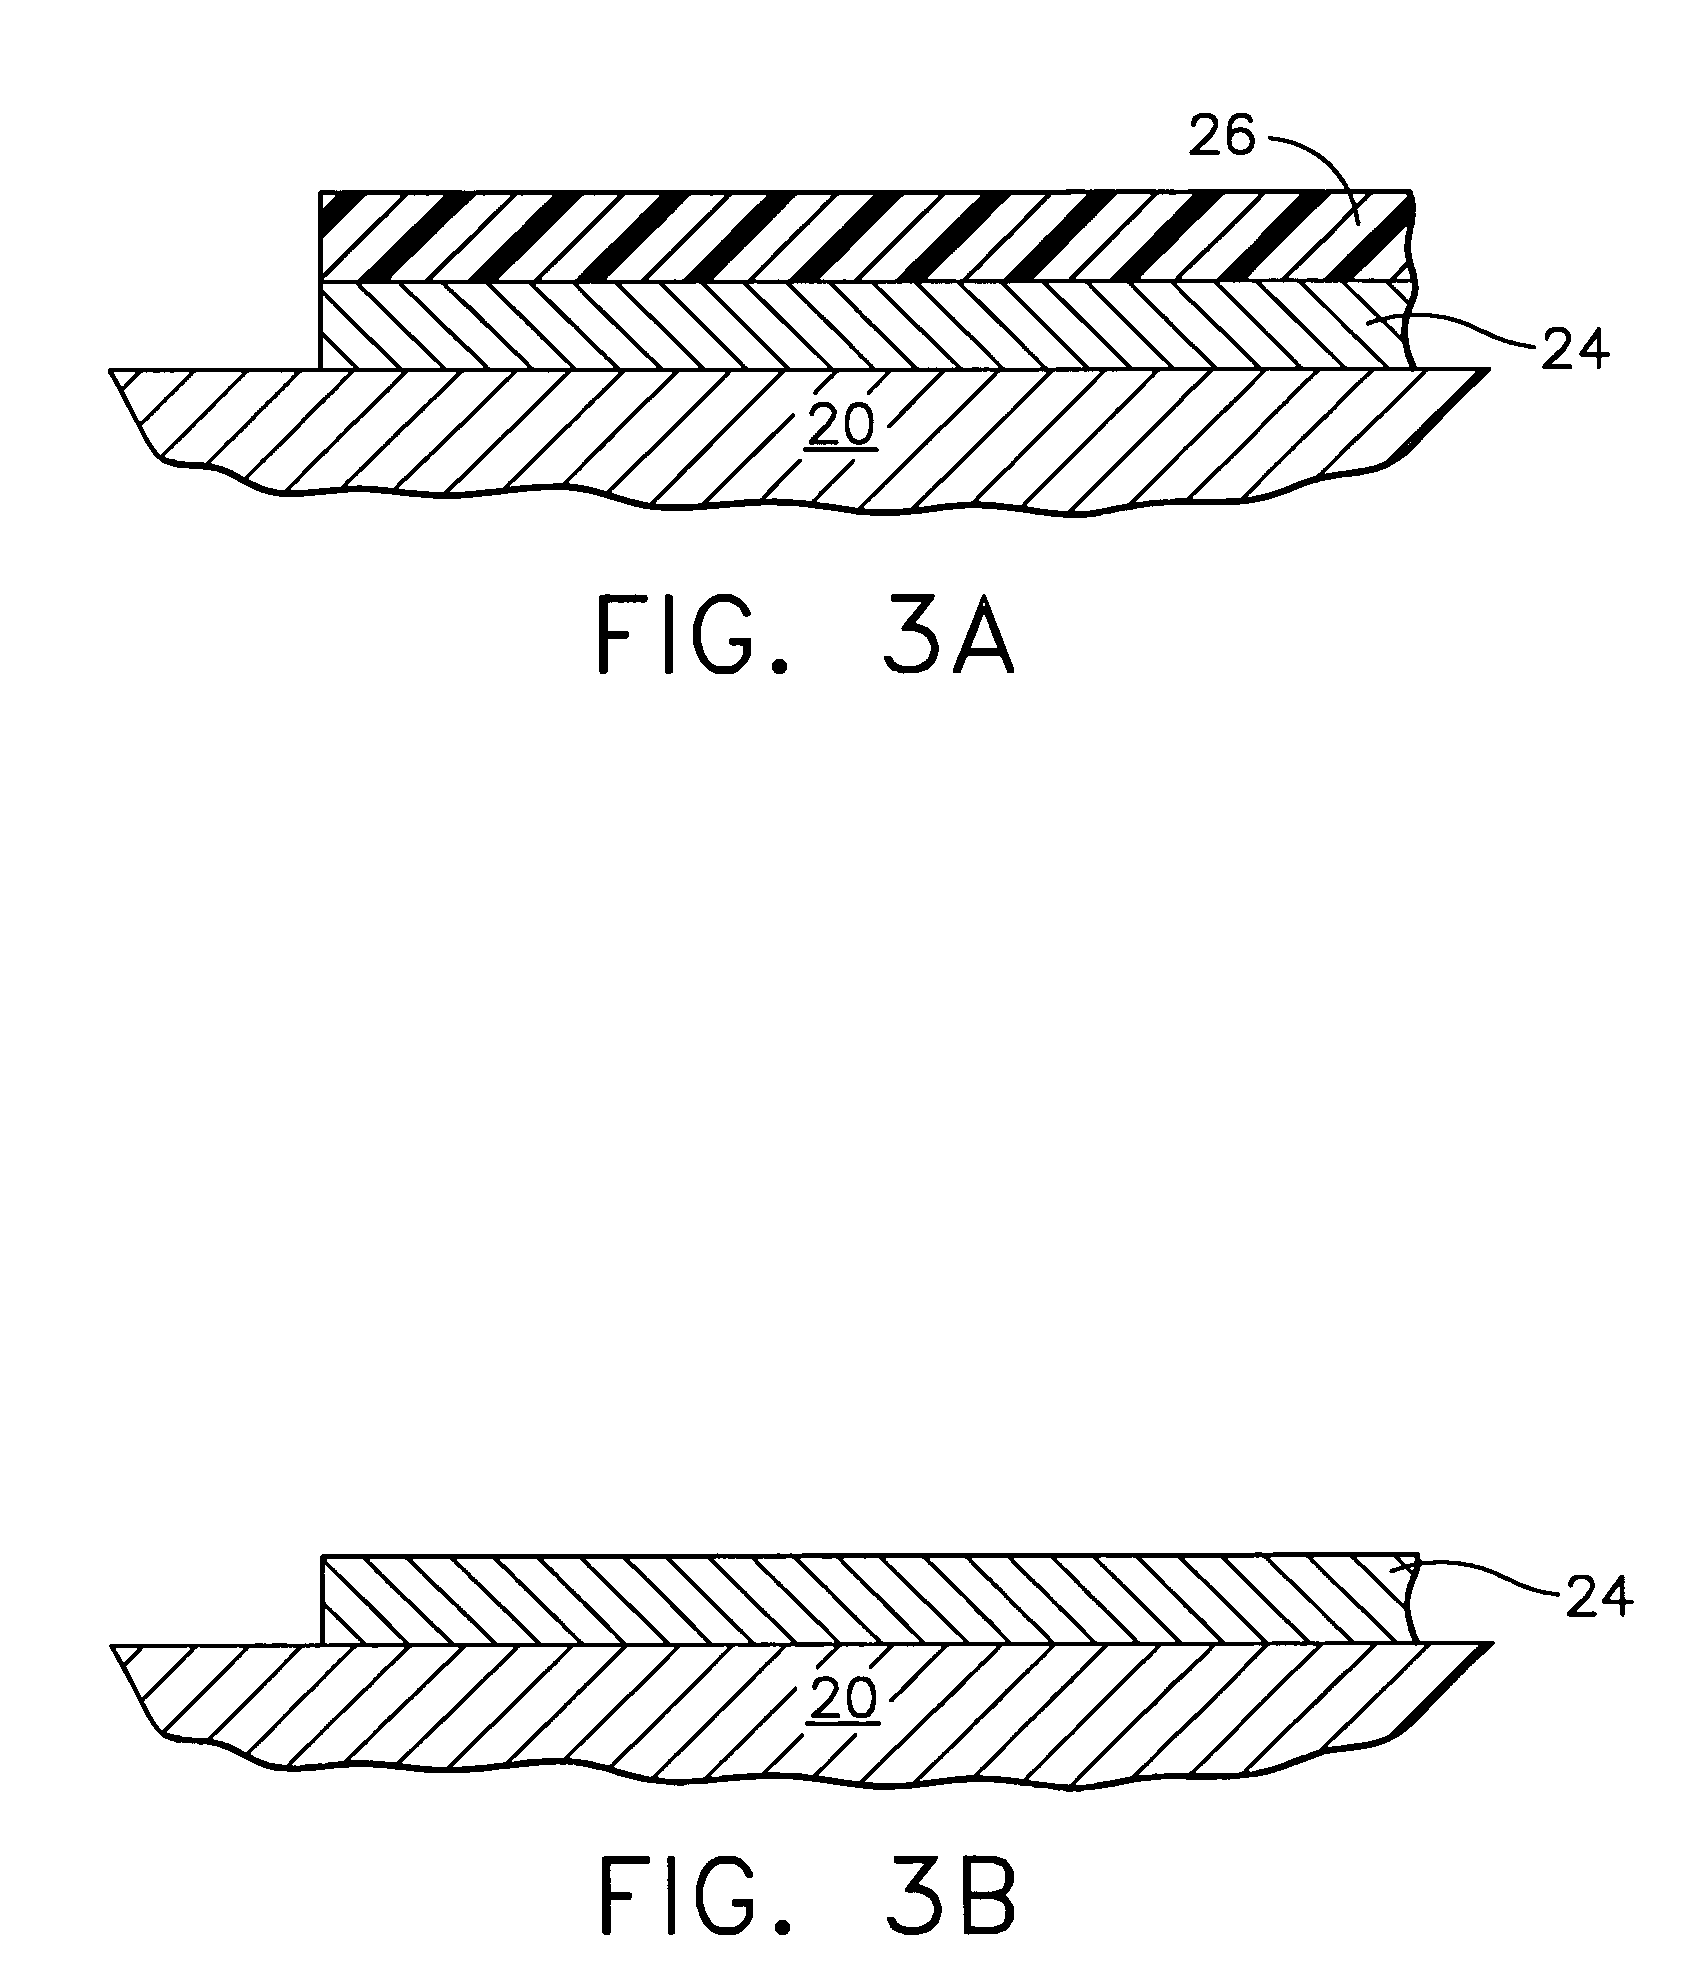 Two-wire layered heater system